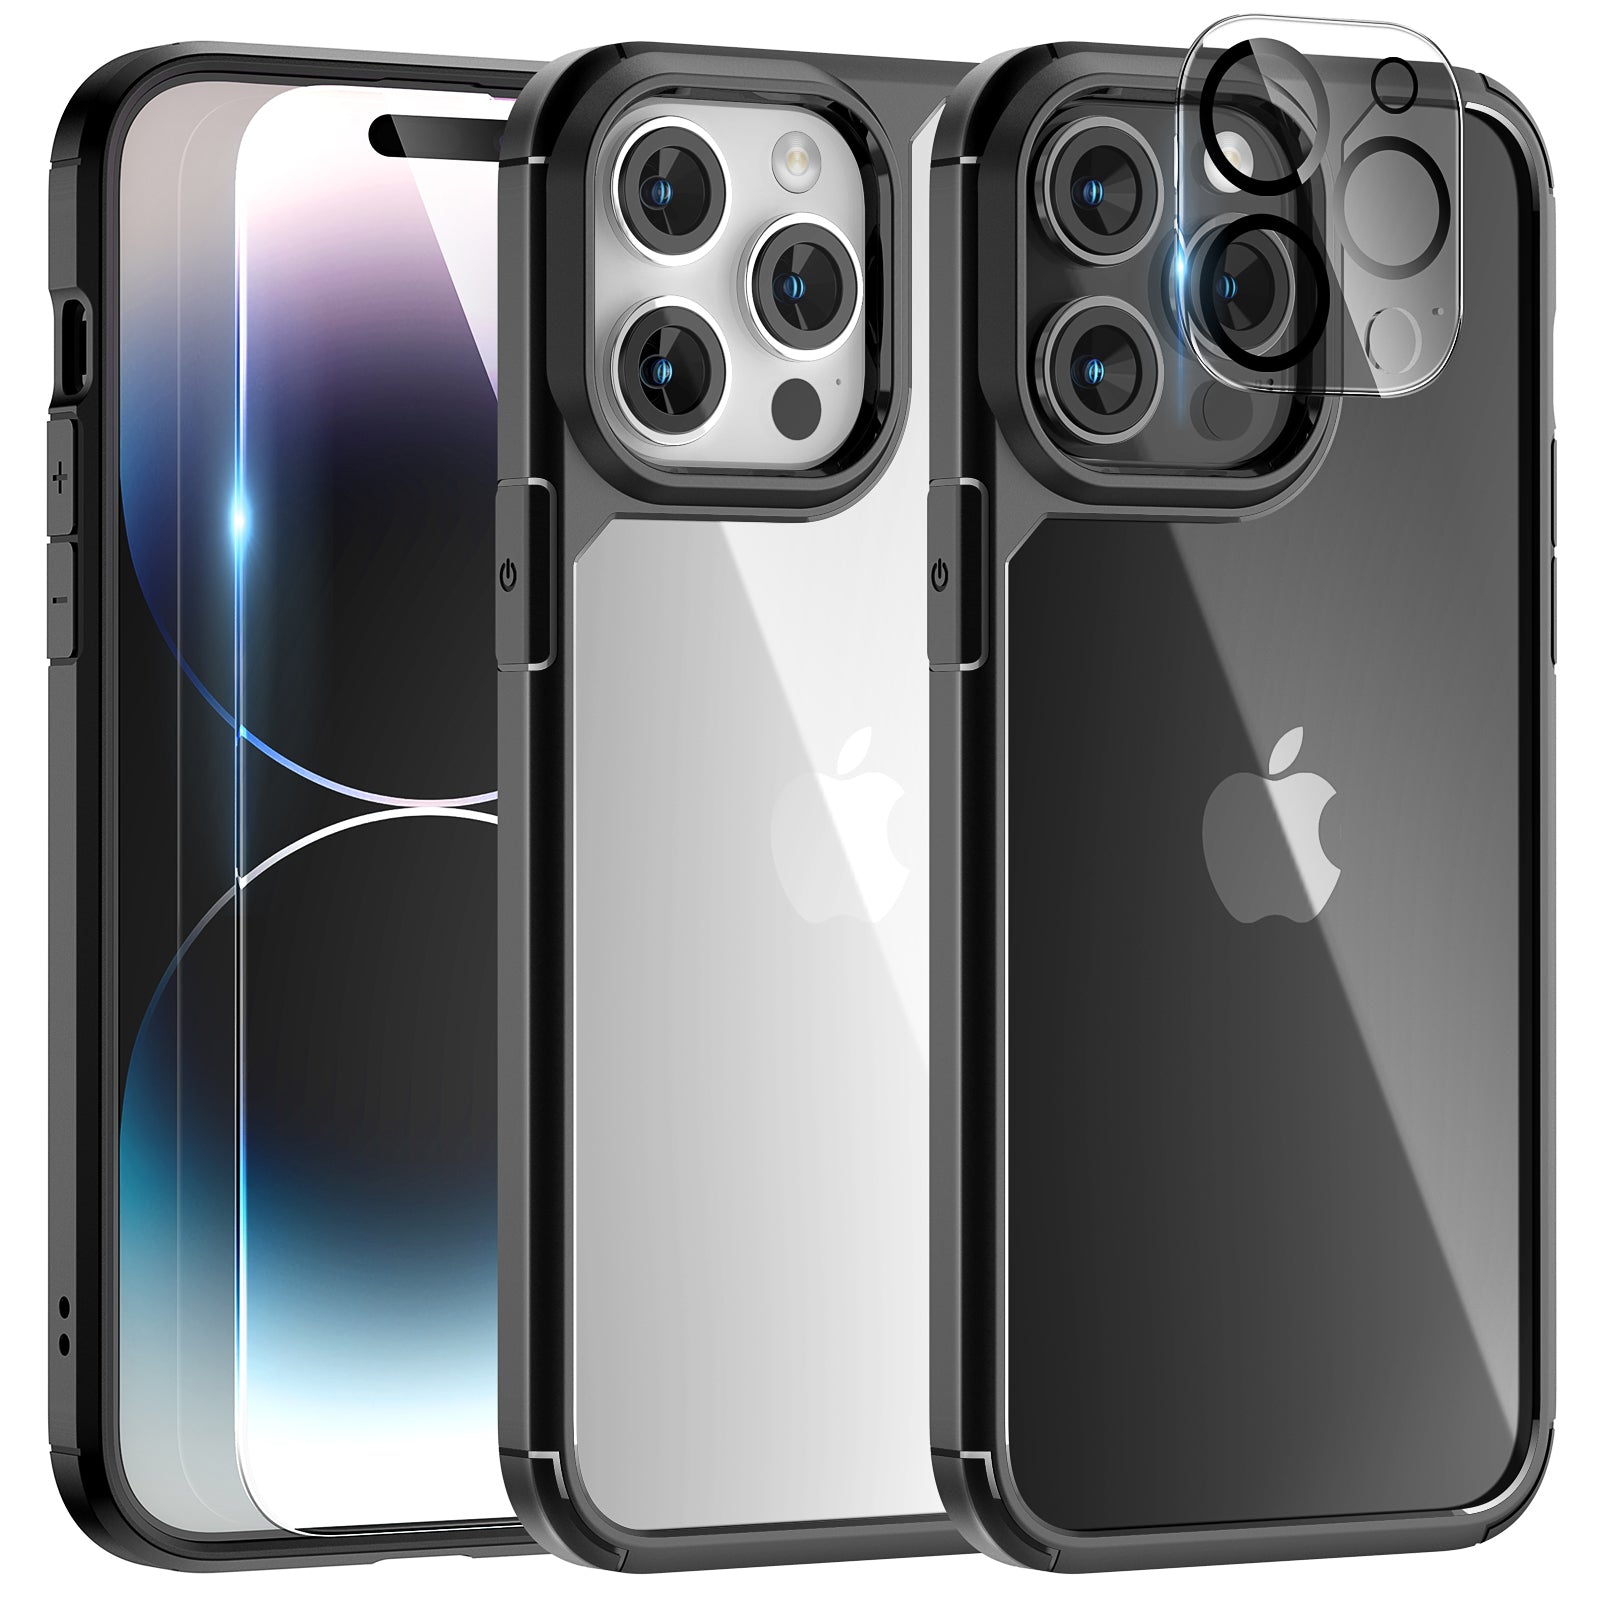 iPhone 14 Pro & Pro Max Camera lens covers from Ringke 